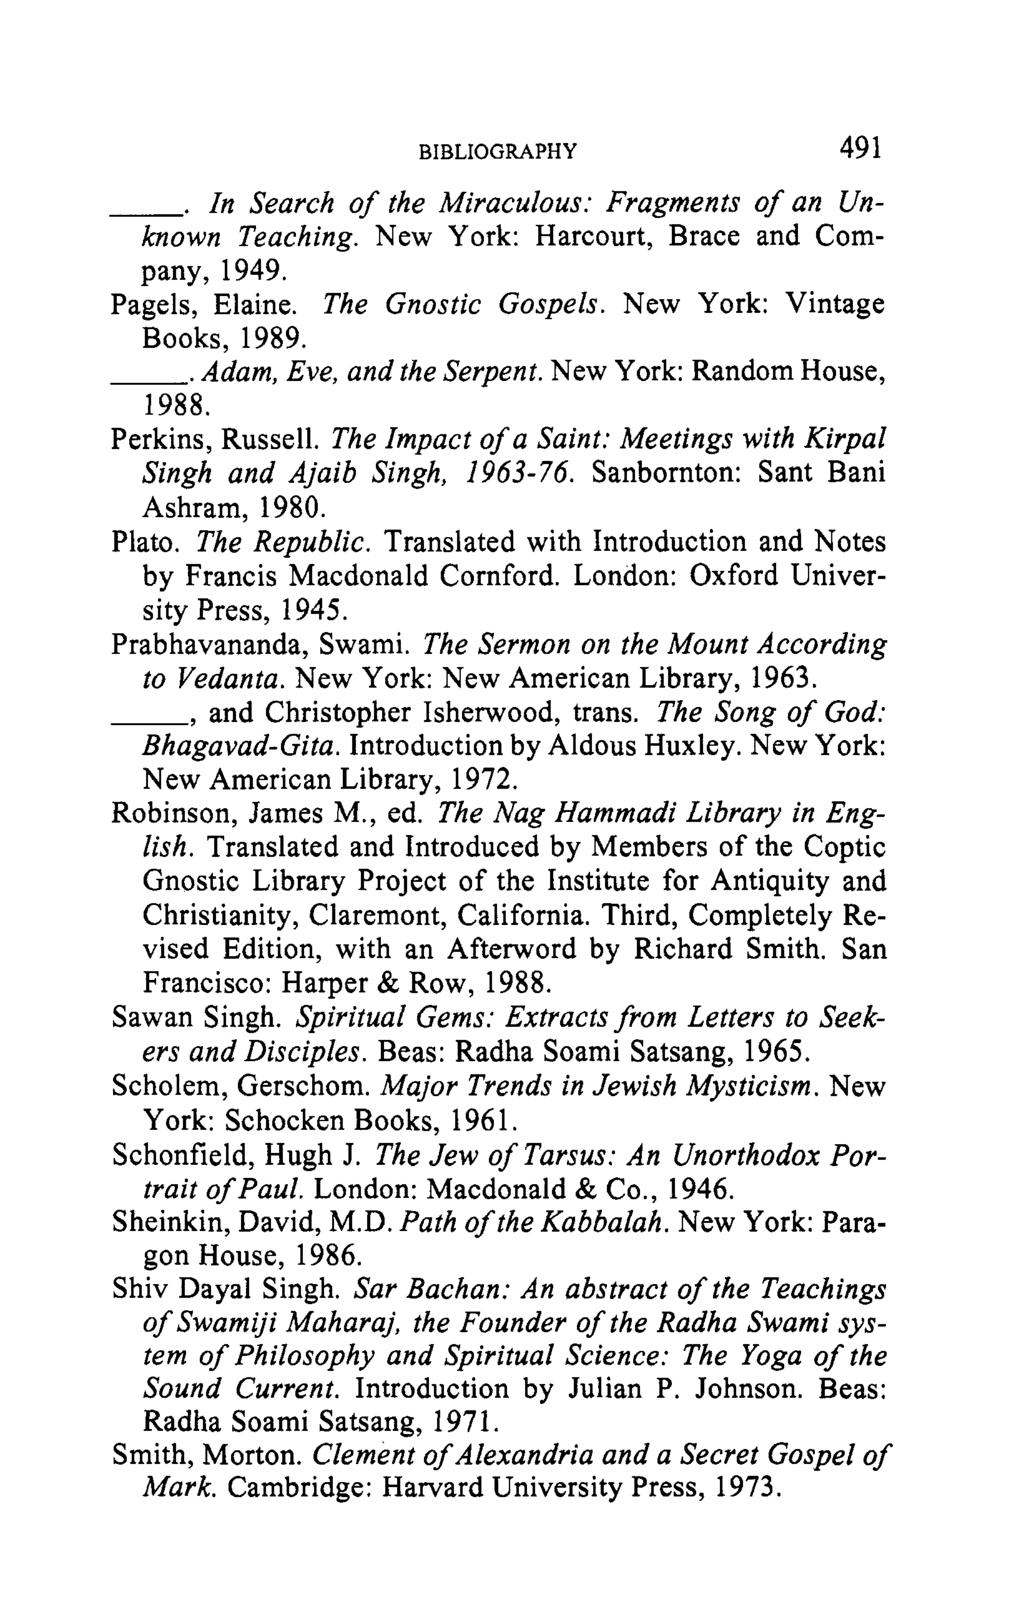 BIBLIOGRAPHY 49 1. In Search of the Miraculous: Fragments of an Unknown Teaching. New York: Harcourt, Brace and Company, 1949. Pagels, Elaine. The Gnostic Gospels. New York: Vintage Books, 1989.